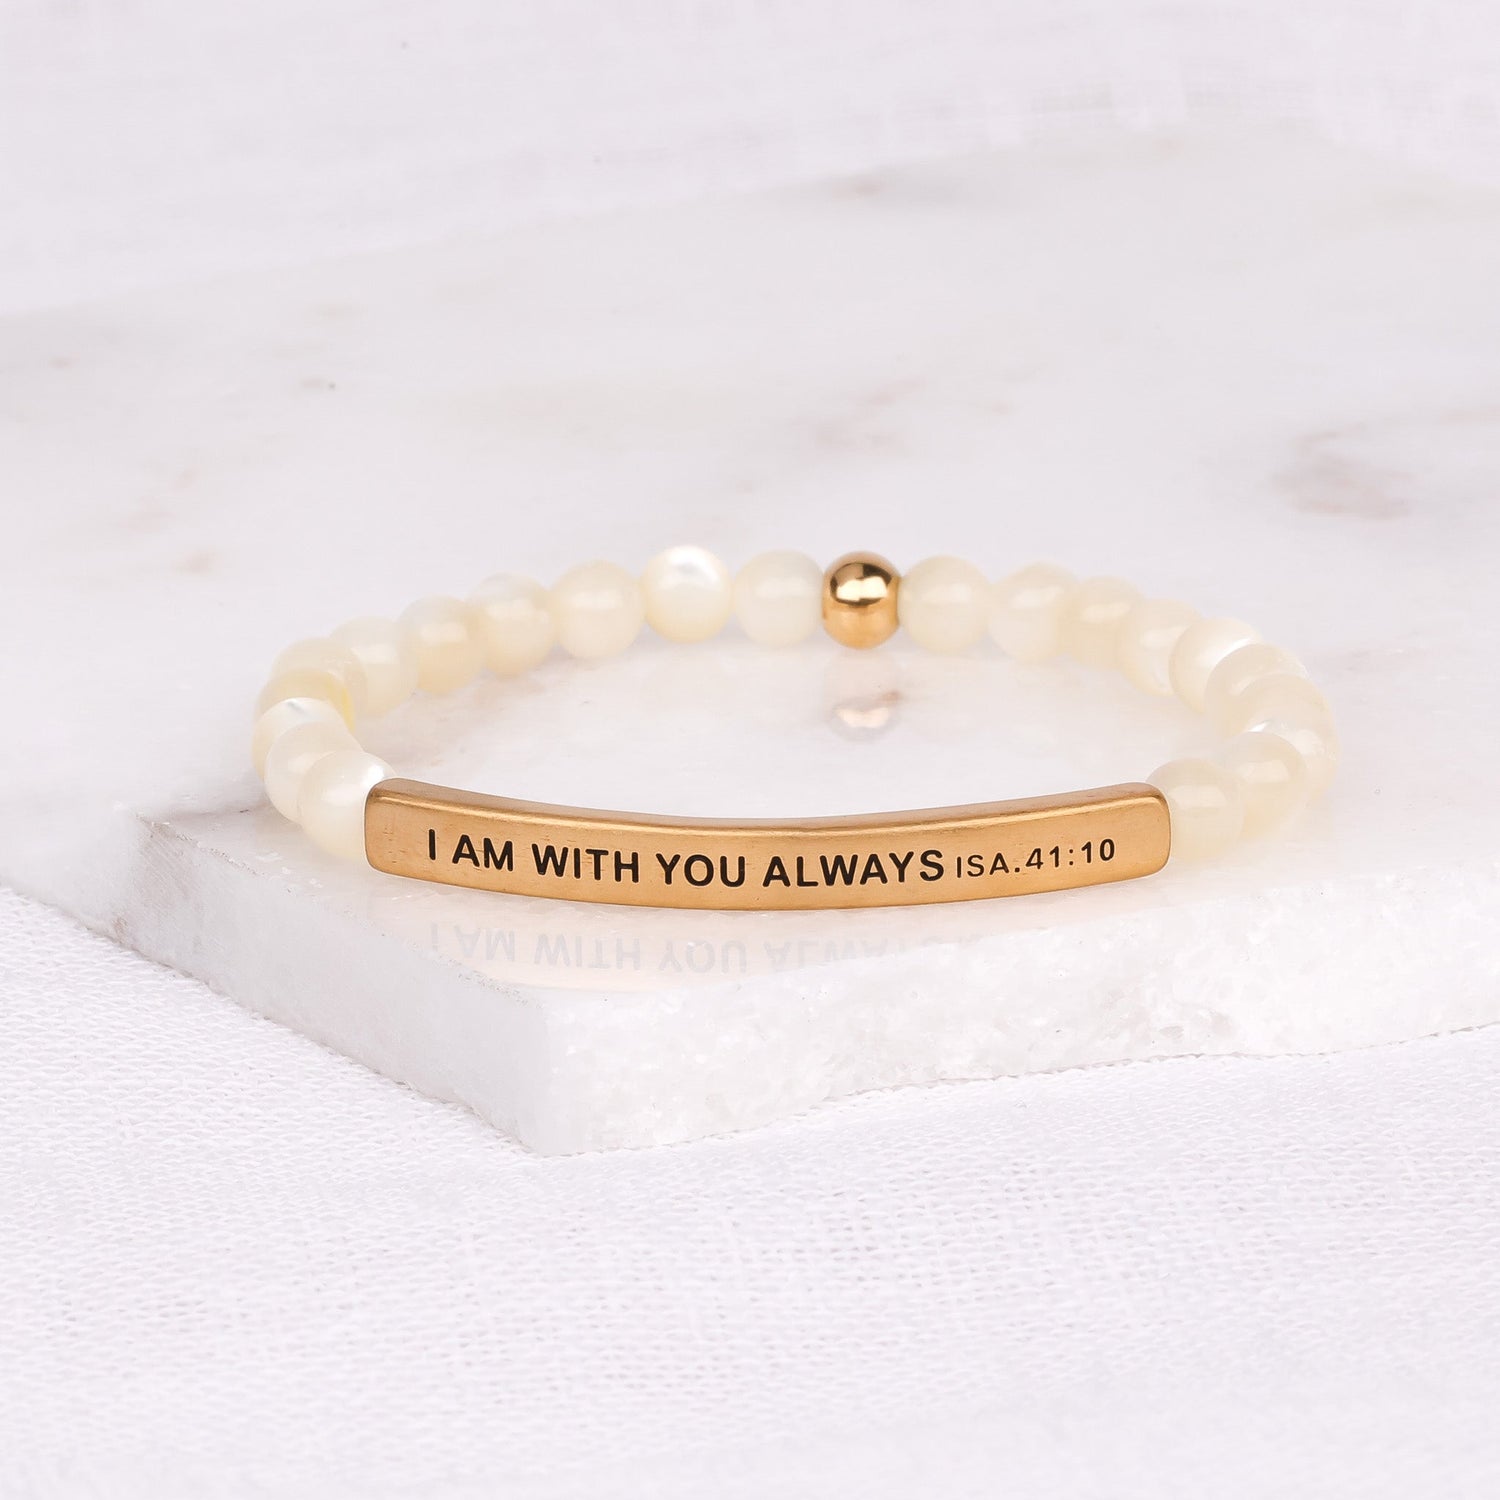 I AM WITH YOU ALWAYS - Inspiration Co.